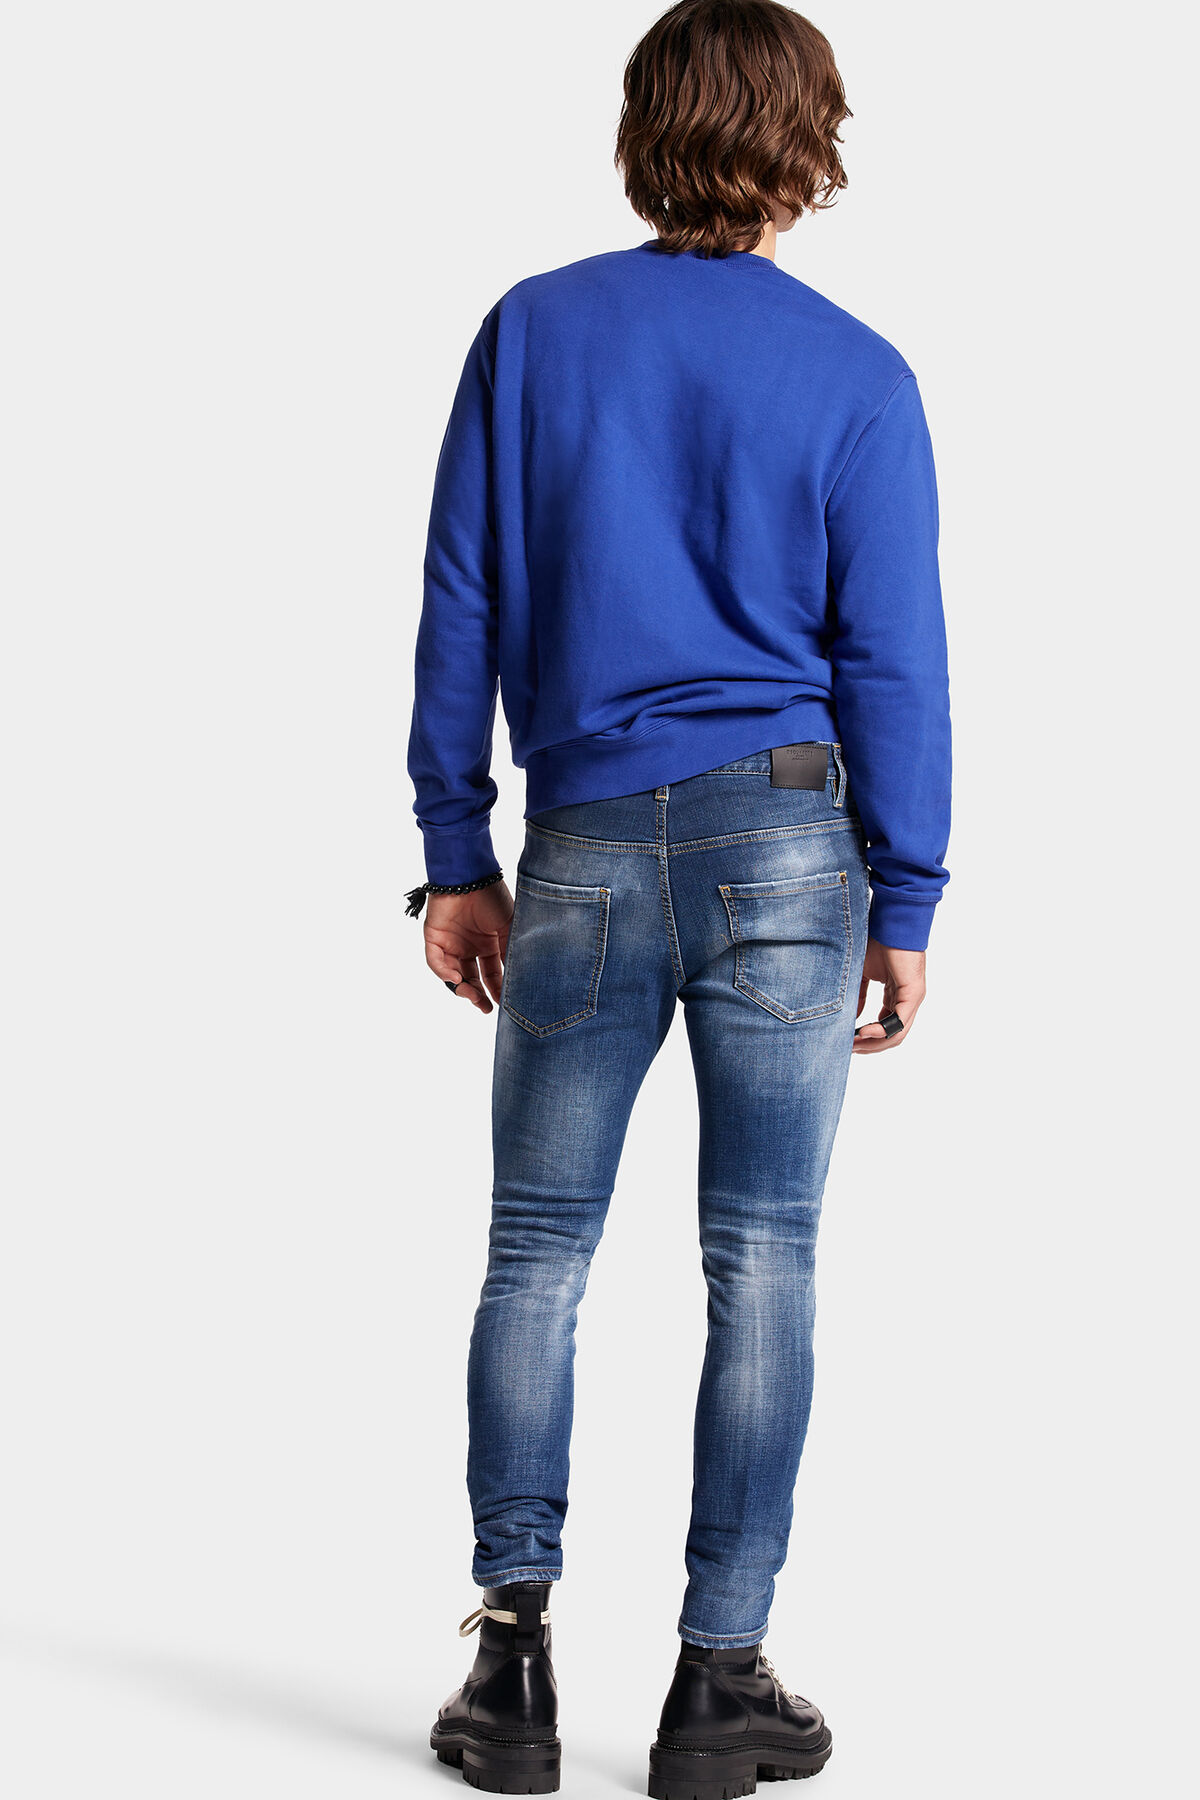 DSQUARED2 Jeans Skater in Washed Blue 52